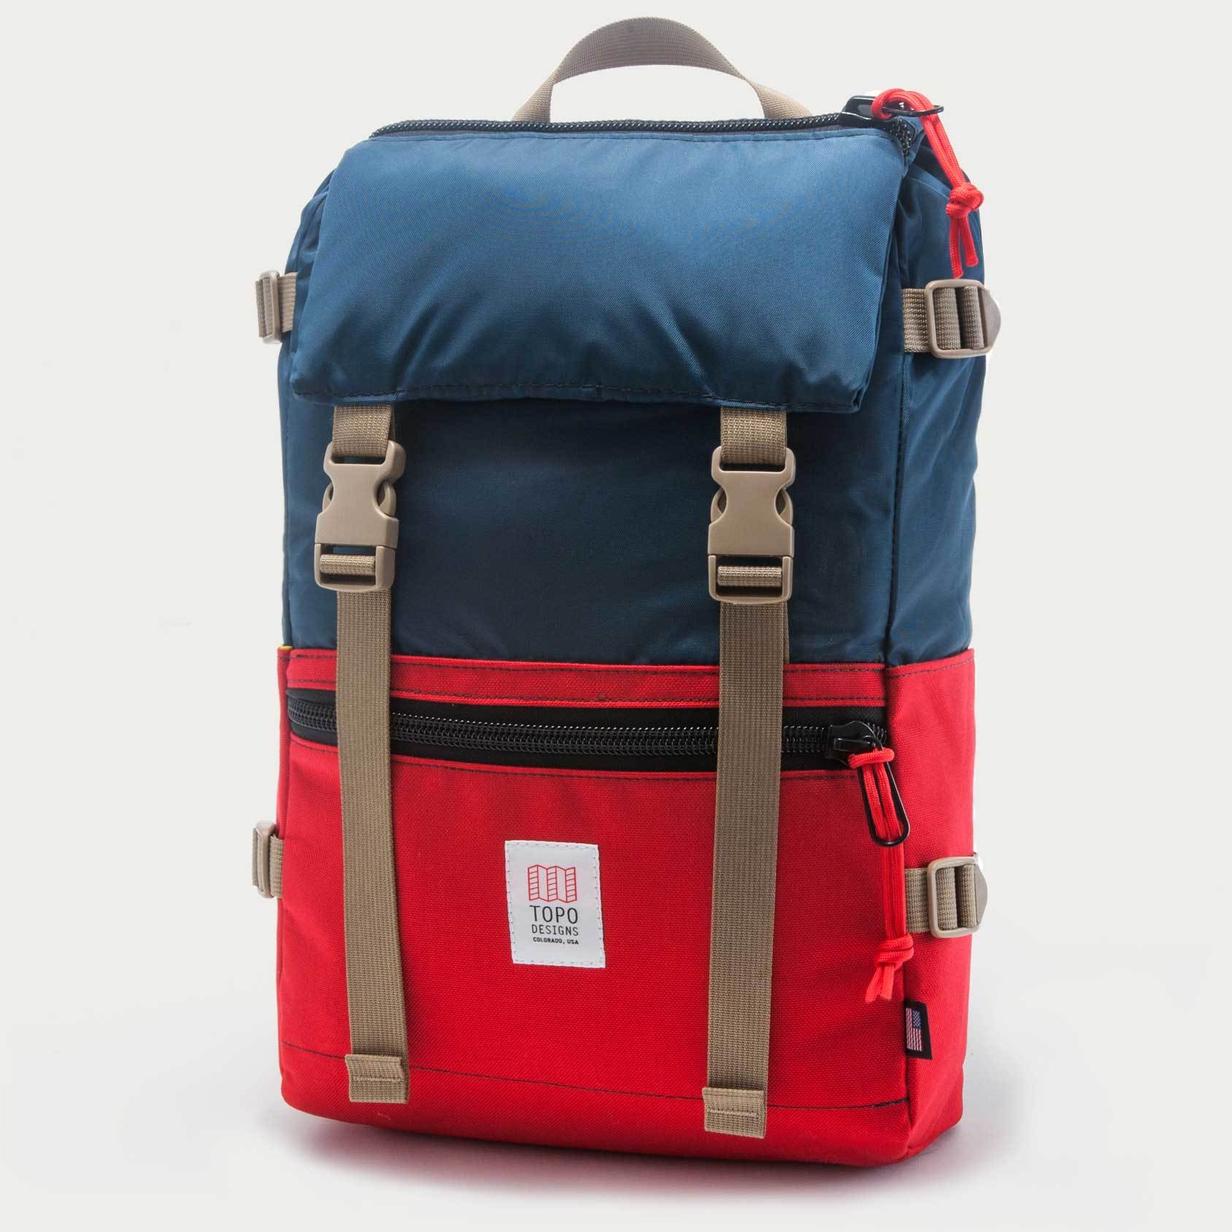 Topo Designs Rover Camera Backpack Navy Red 02